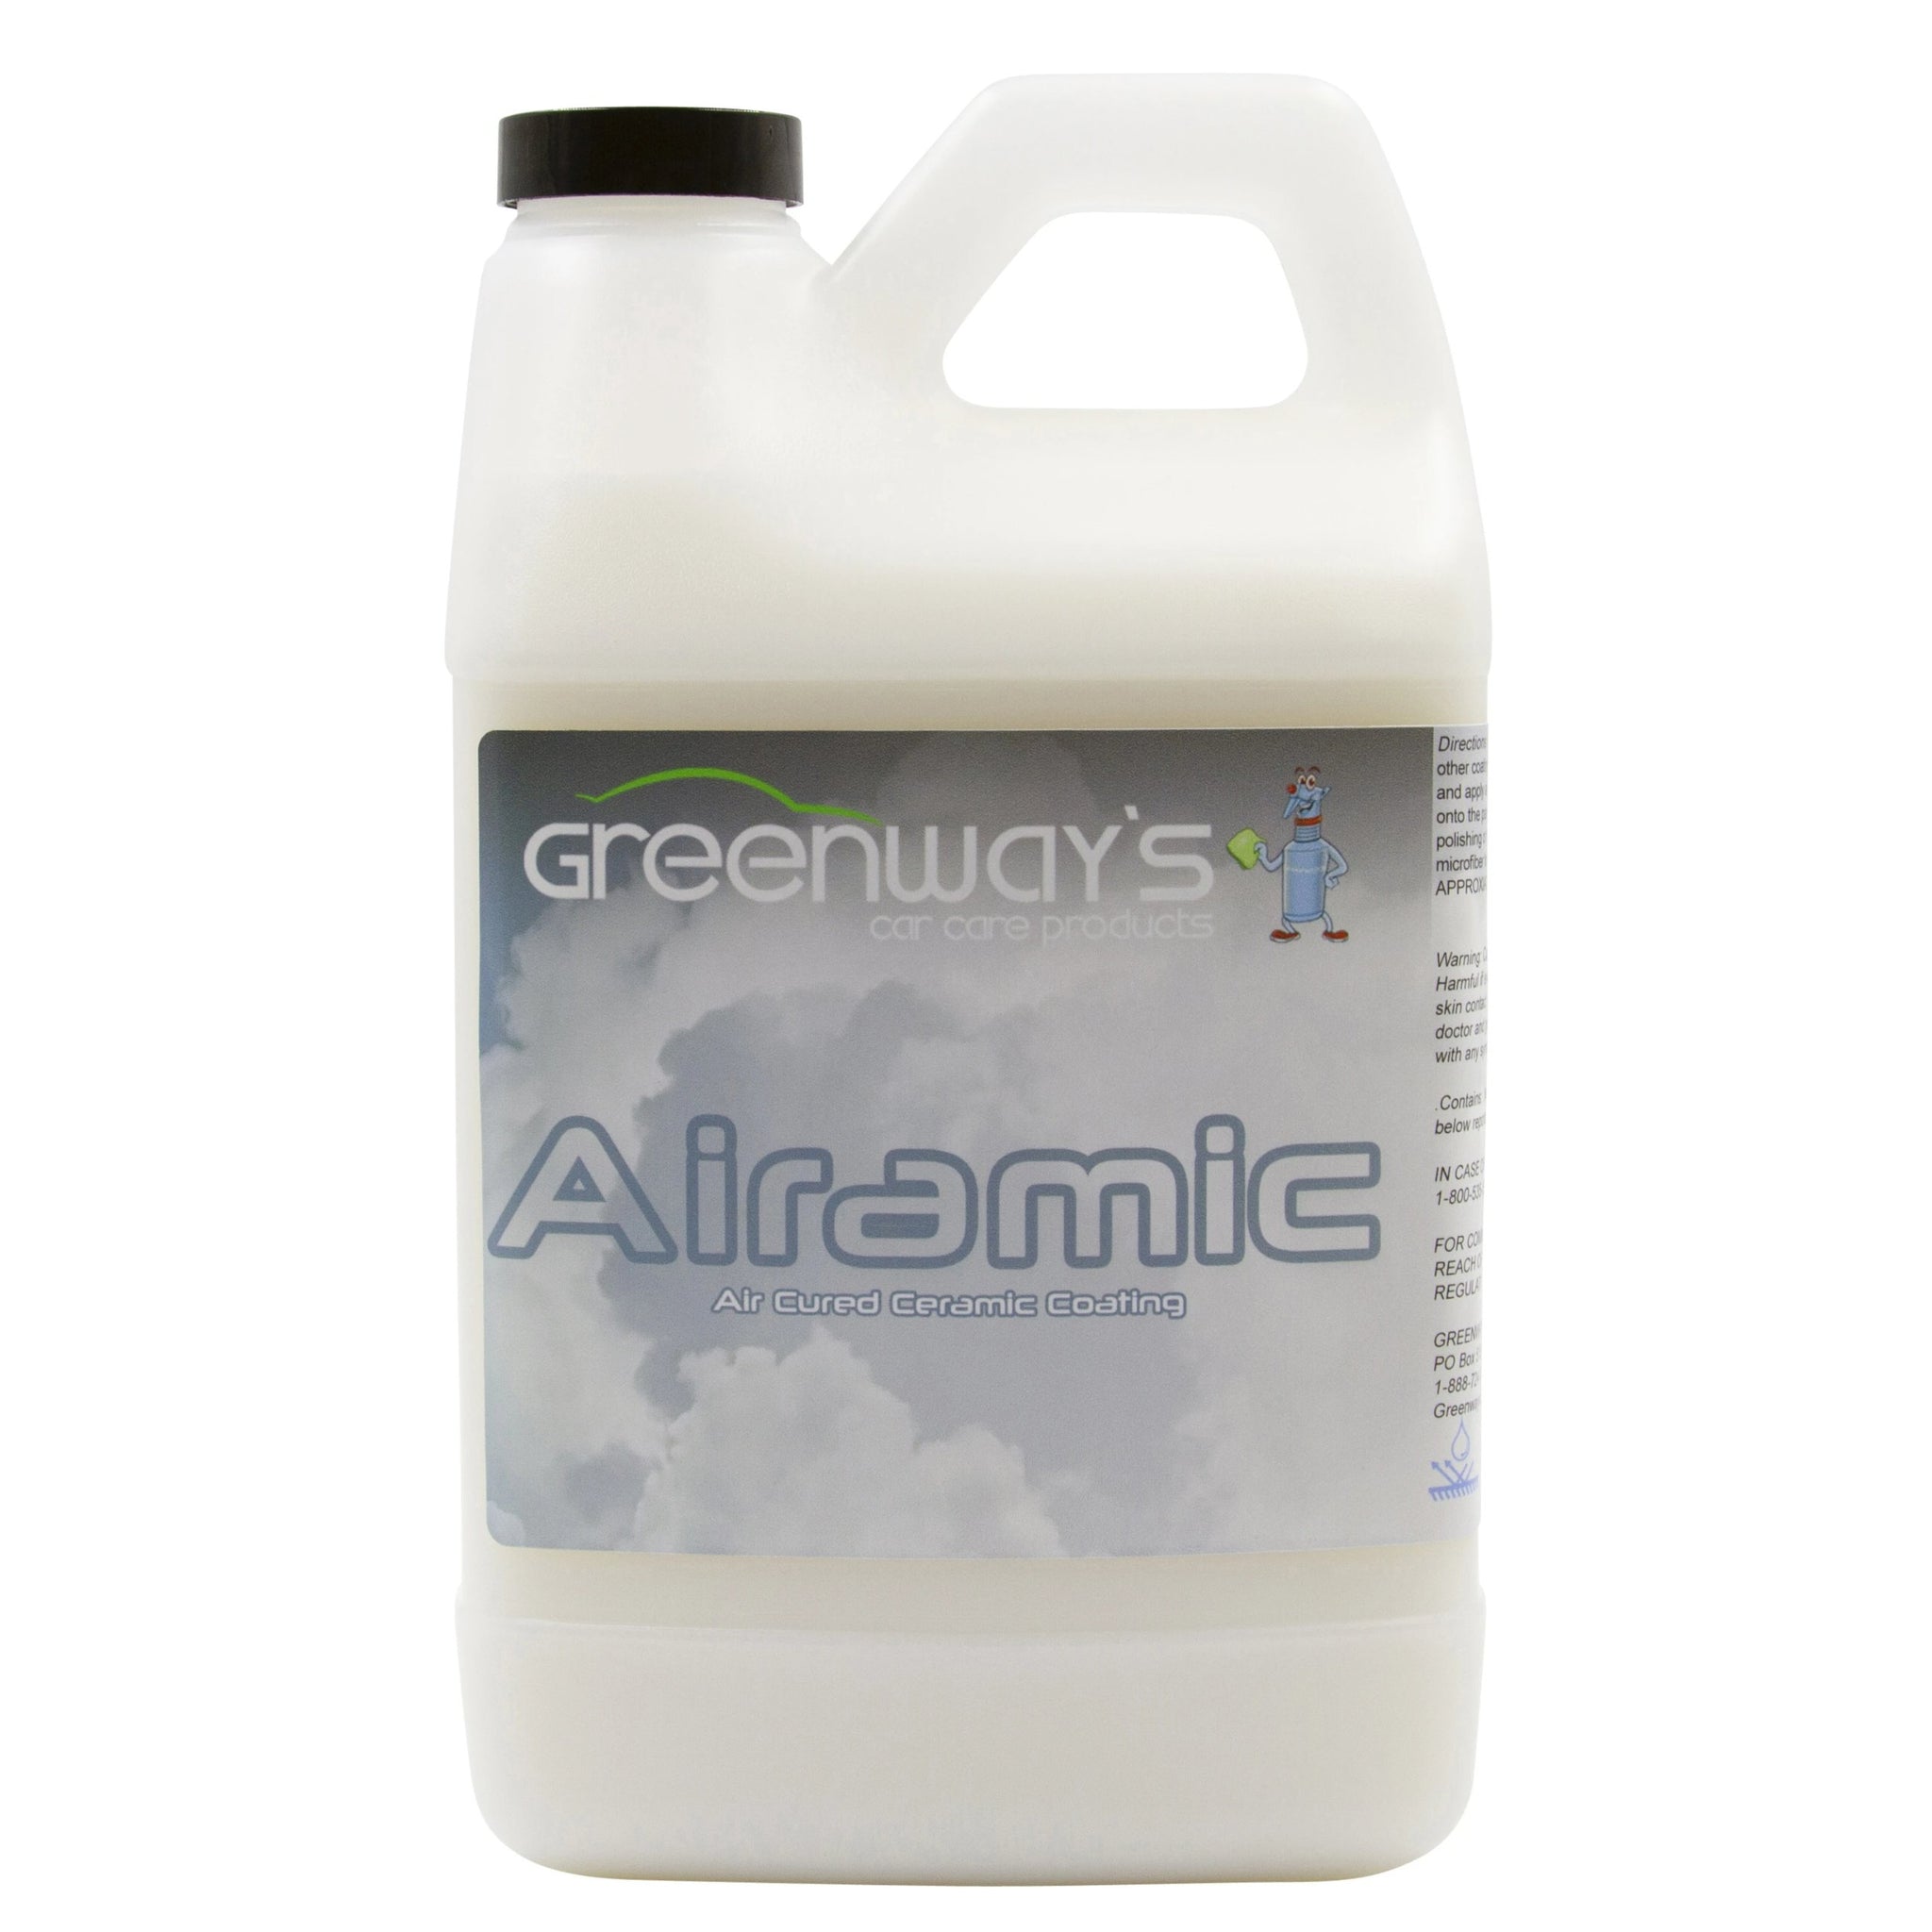 Greenway’s Airamic, air curing ceramic coating spray sealant for paint, glass, plastic, rubber, 2 year duration, 64 ounces..